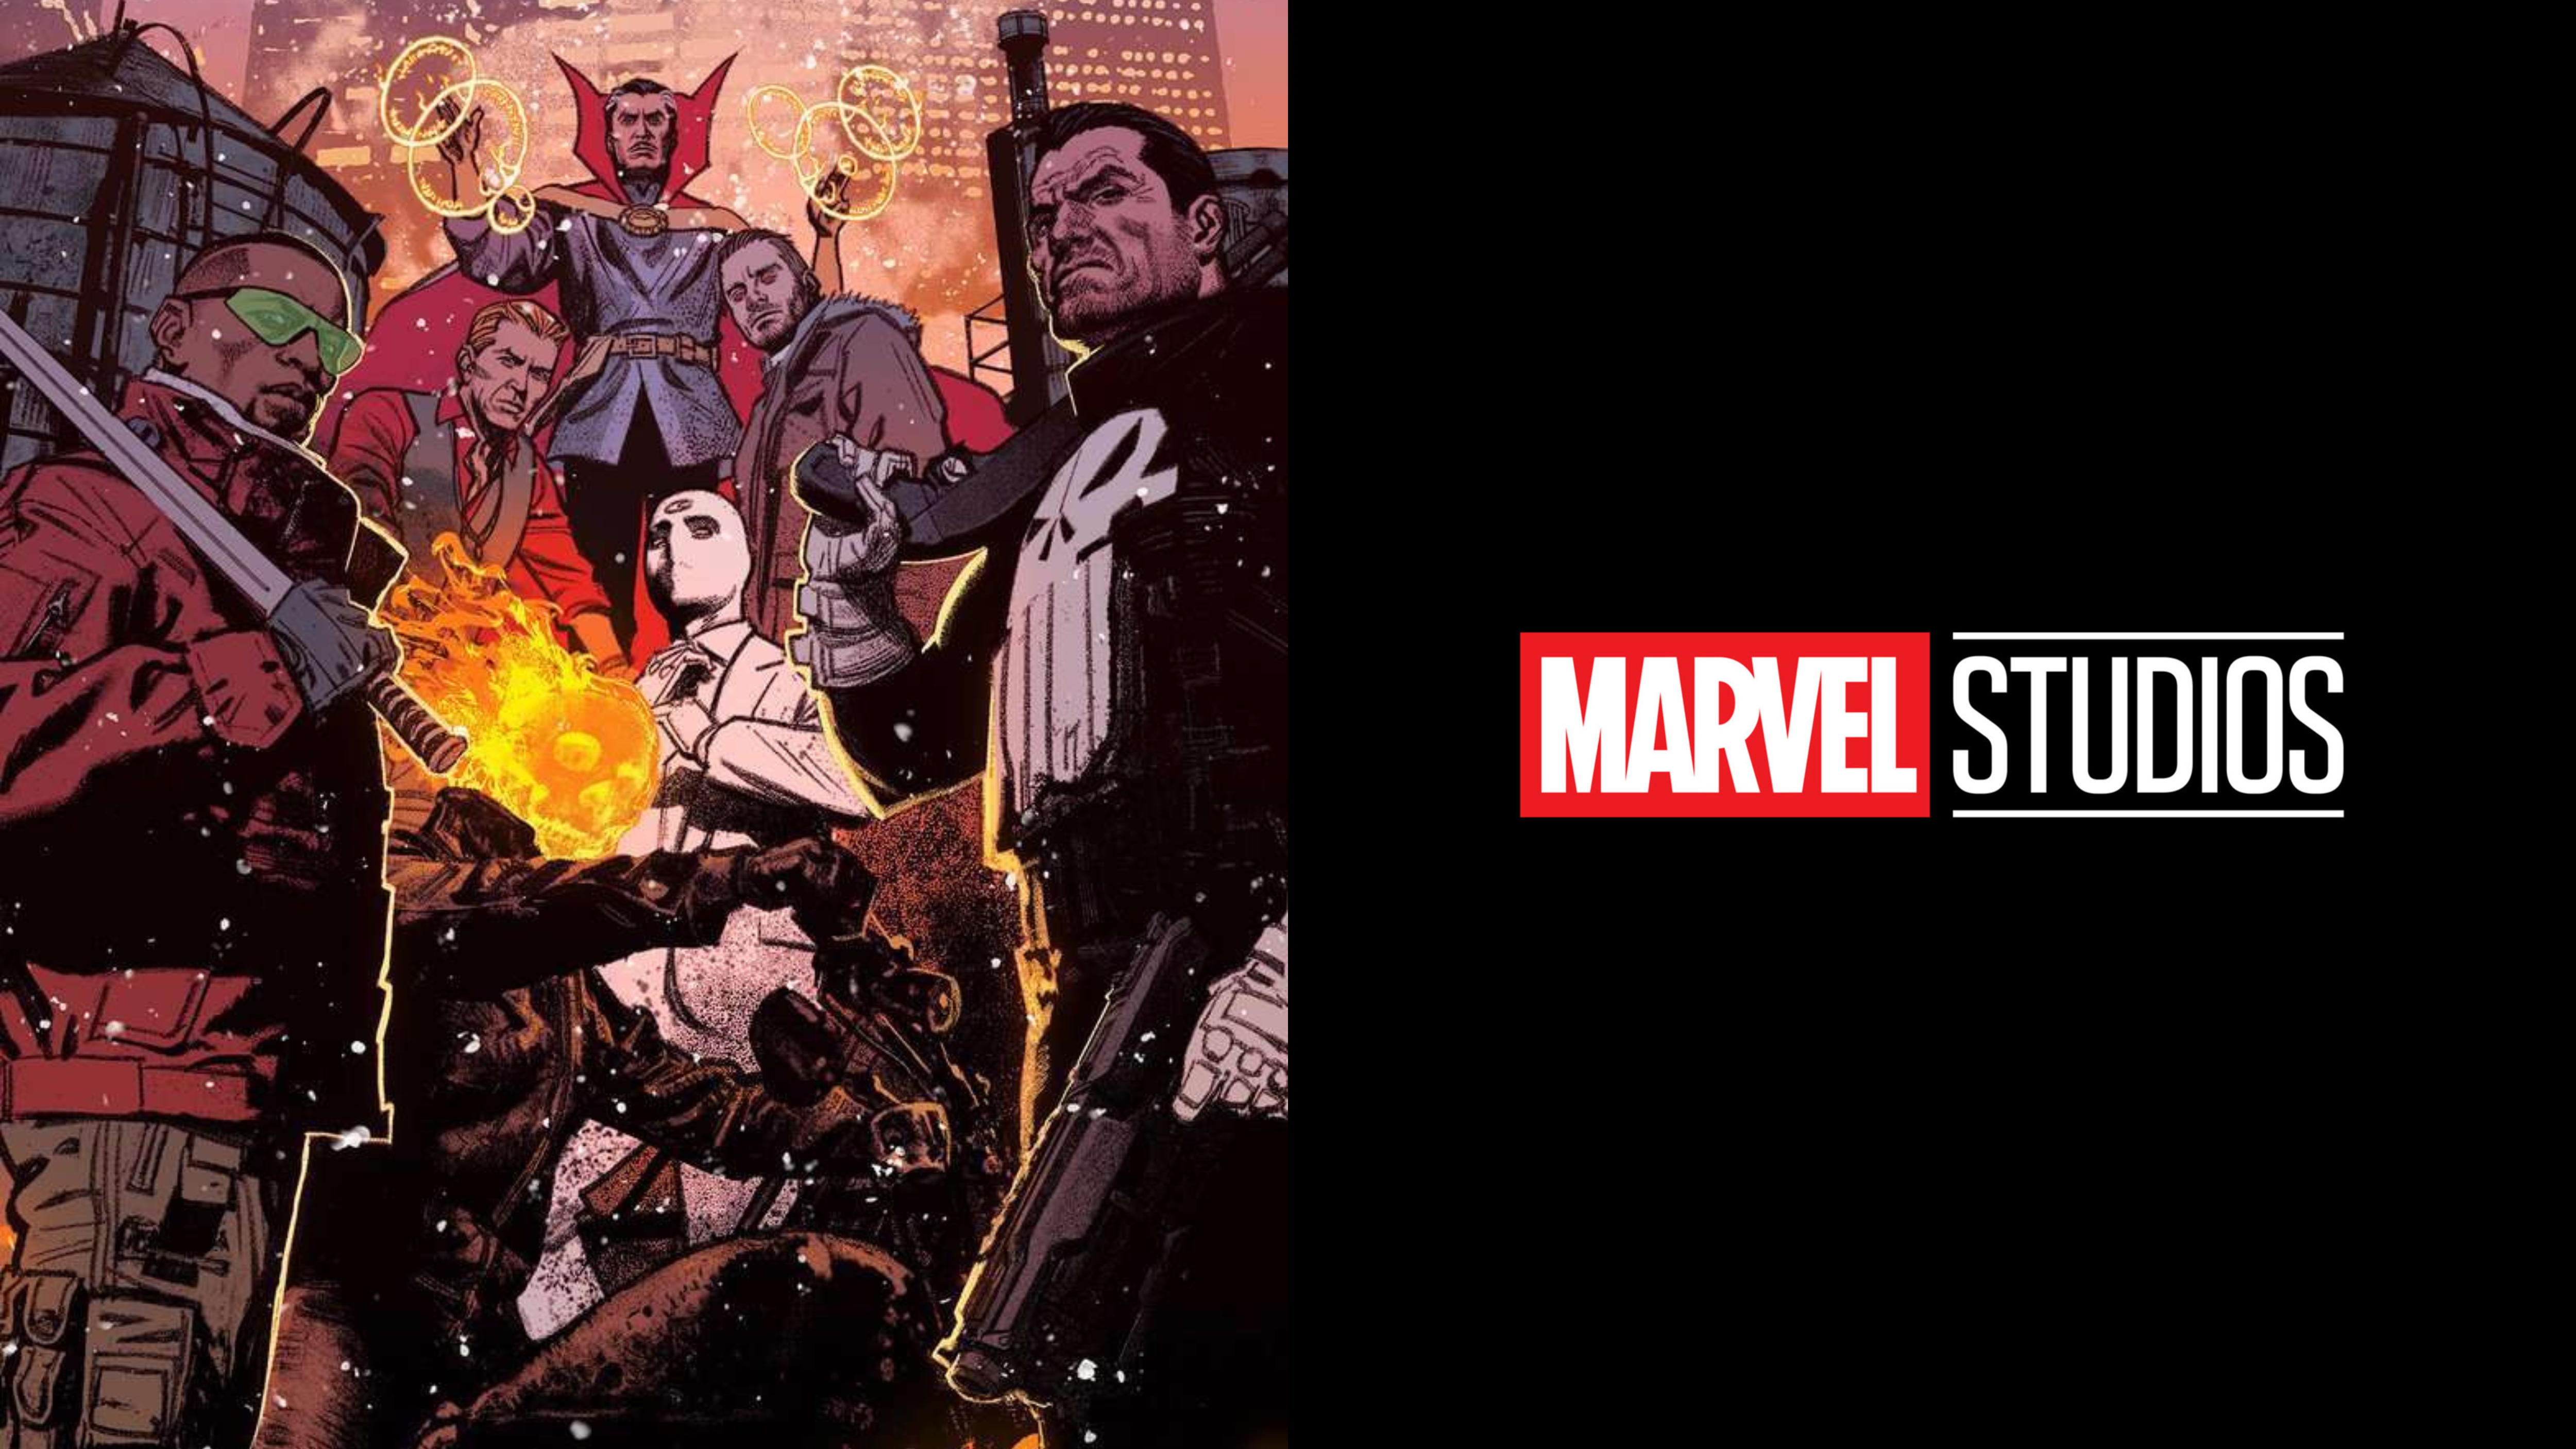 Midnight Sons Comic Art and Marvel Studios Logo amidst rumors of a potential Midnight Sons Movie.